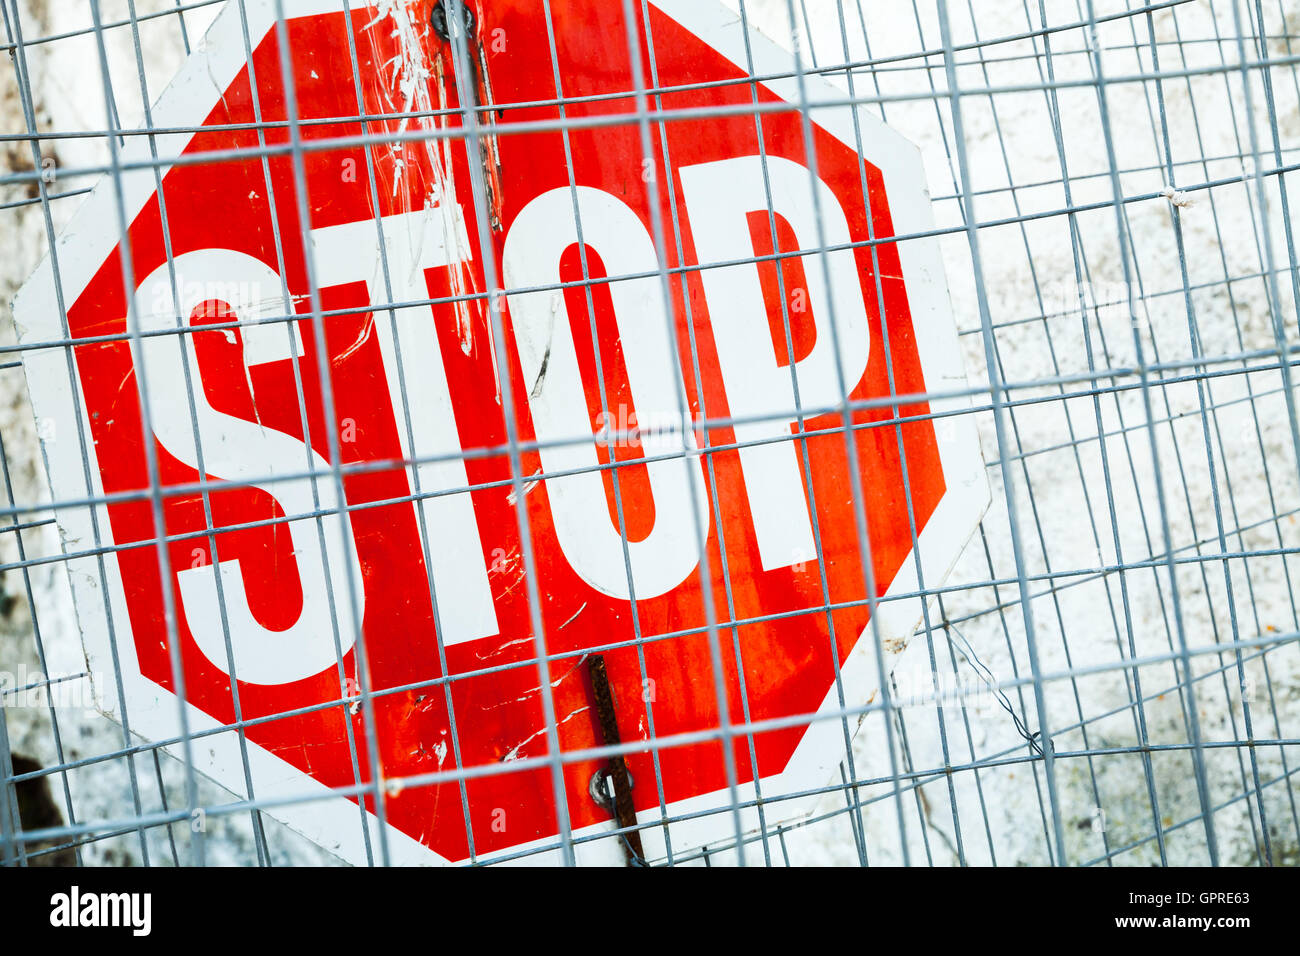 Red stop road sign covered with metal grilles Stock Photo